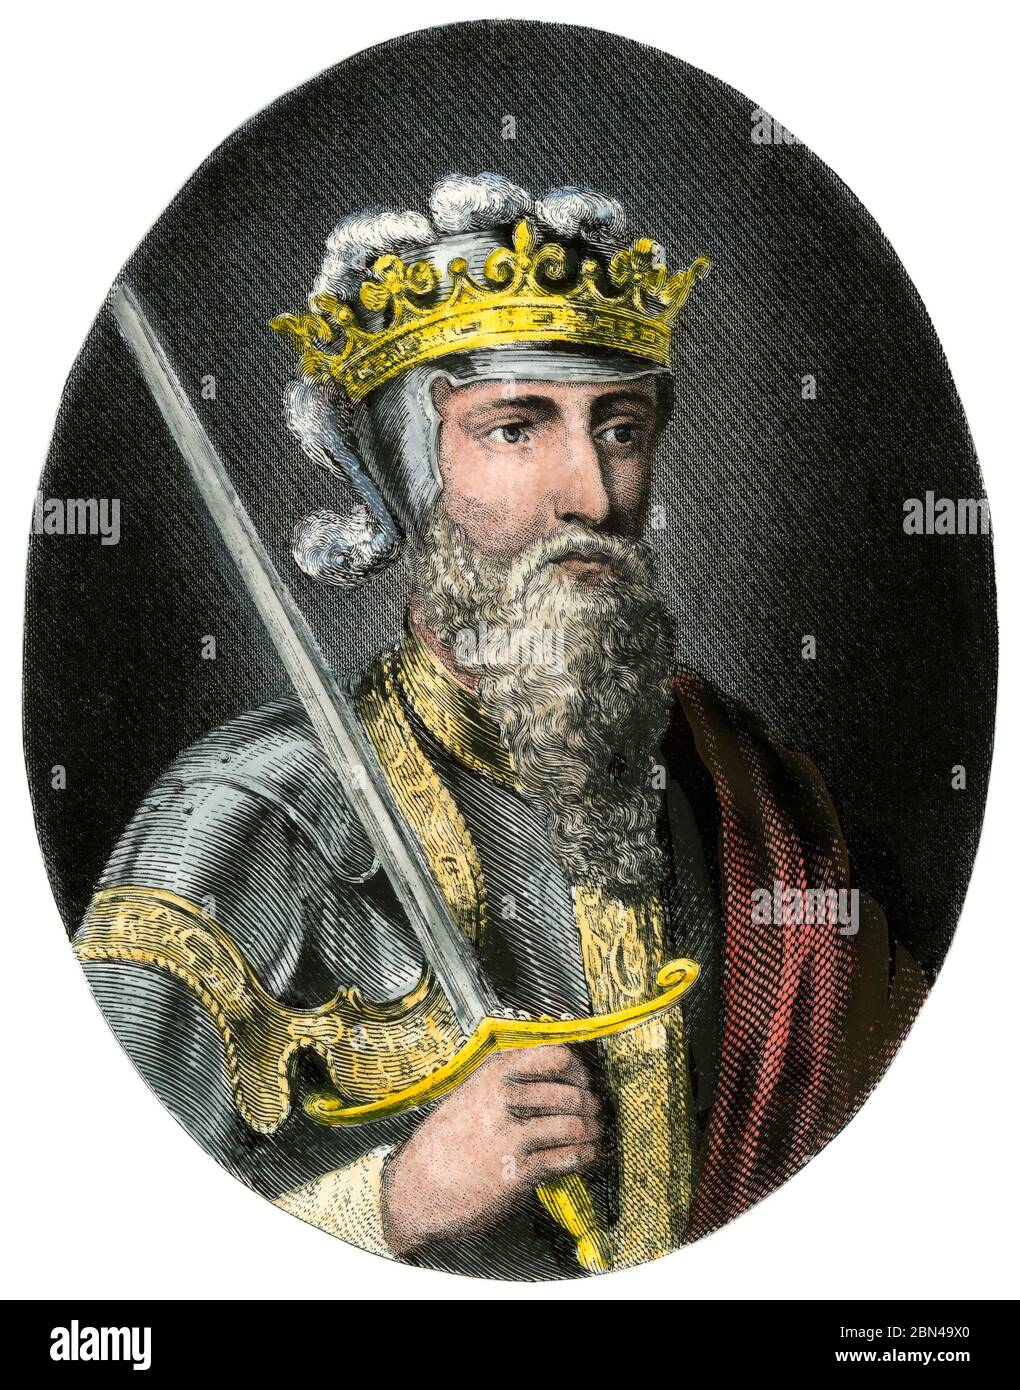 King of England Edward III. Hand-colored engraving Stock Photo